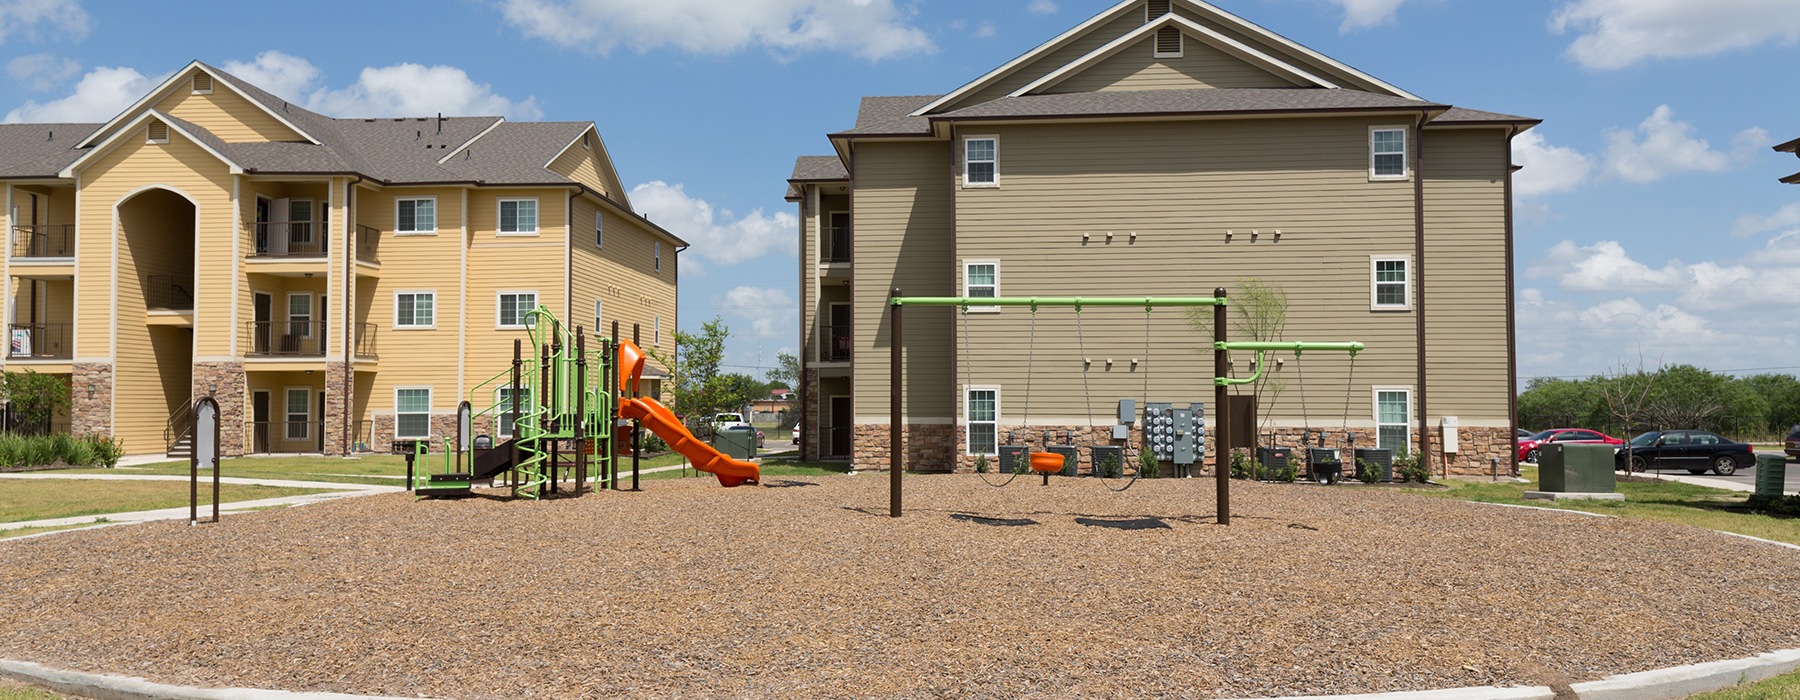 large play area with playscape